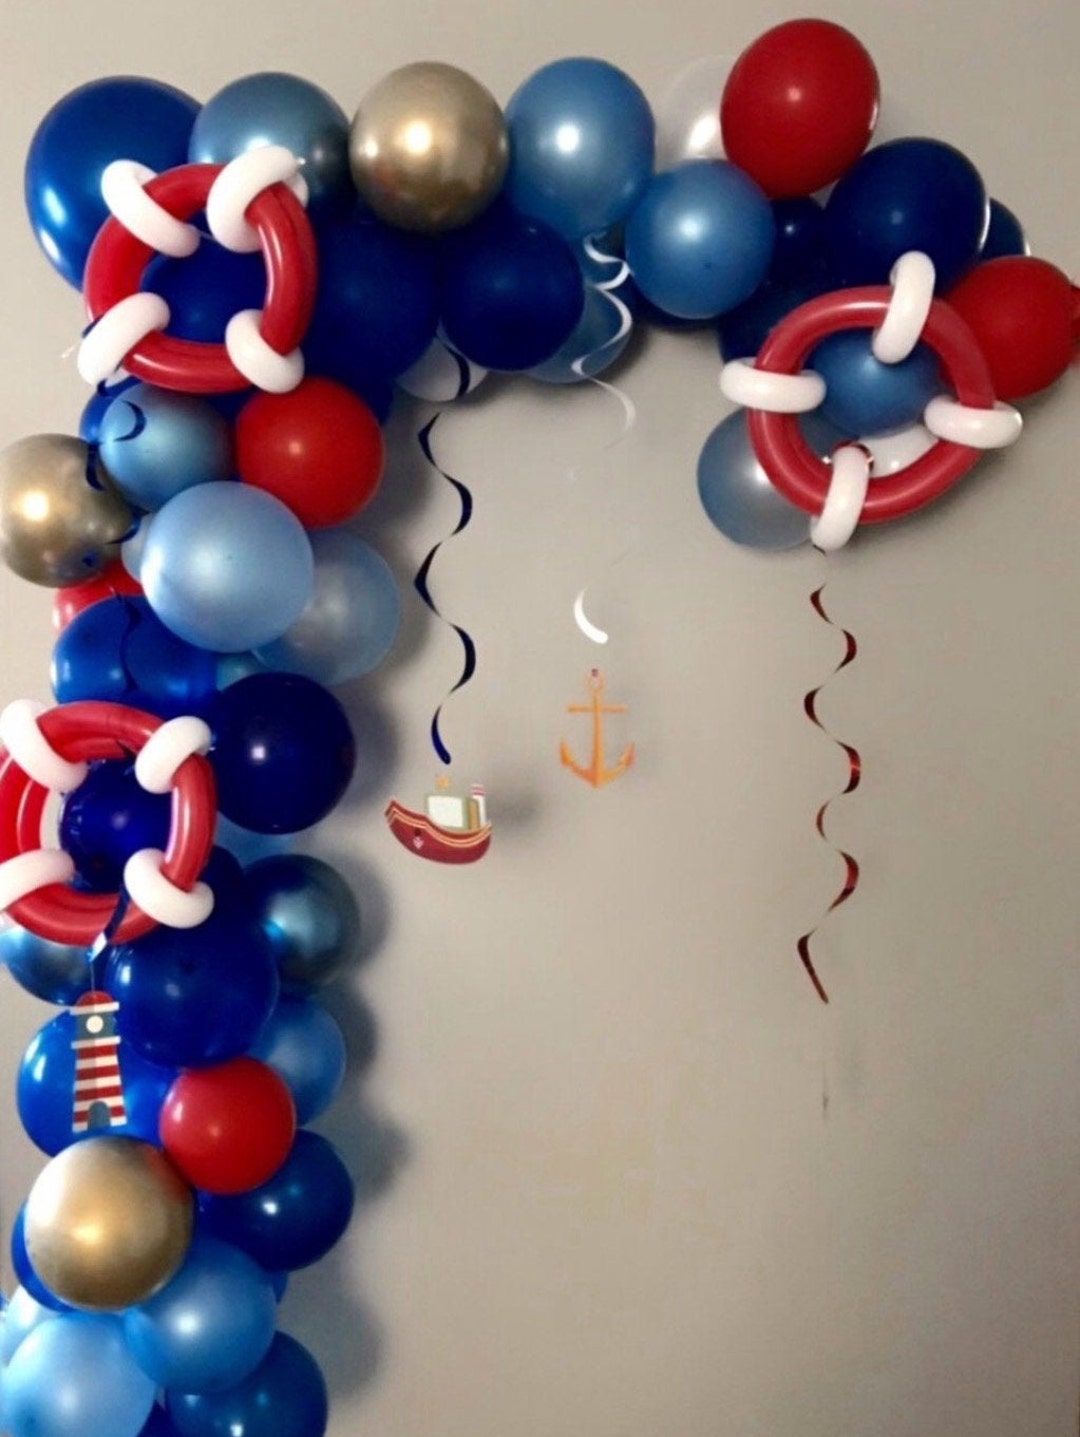  45 Pieces Nautical Balloons Nautical Party Latex Balloons  Decorations Anchor Sailboat Decorations for Kids Boys Birthday Baby Shower  Party Supplies : Toys & Games